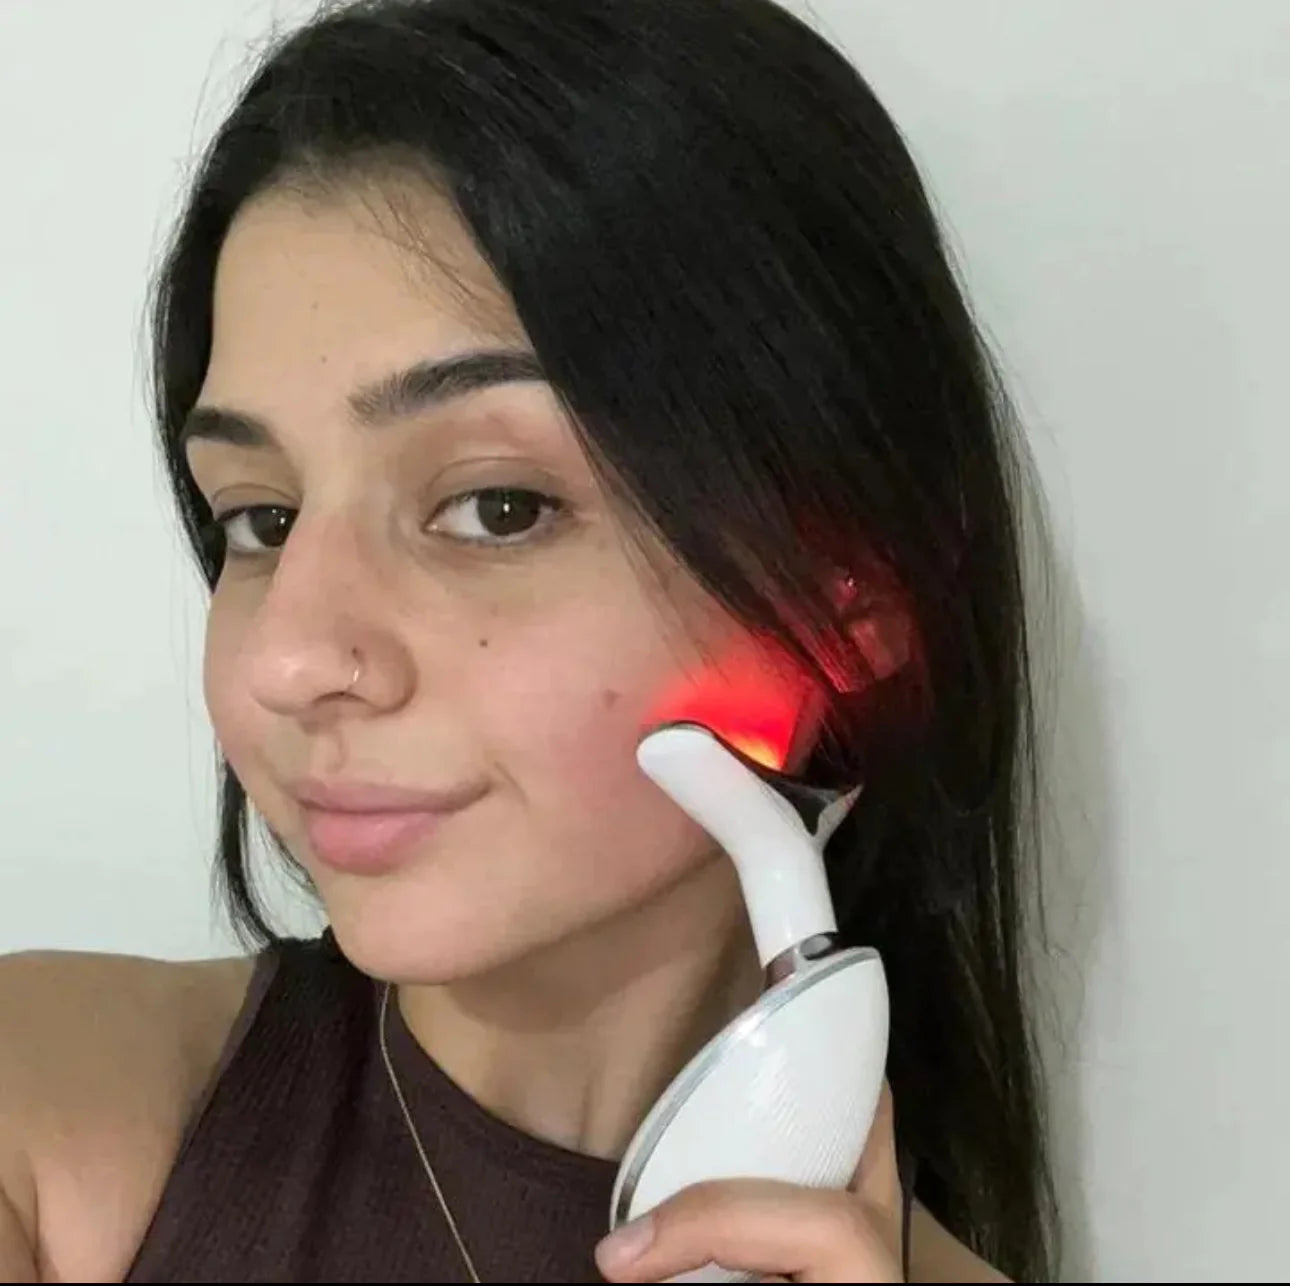 Wavy Chic Beauty Facial Massager, 7 Color Wavy Acne Beauty Microcurrent Facial Device Skin Firming for Face Neck Beauty Device, Neck Tightening Face Shaper for Jawline Anti-Aging Device Face Lifting Face Slimming Skin Care Routine Beauty Daily Comfort